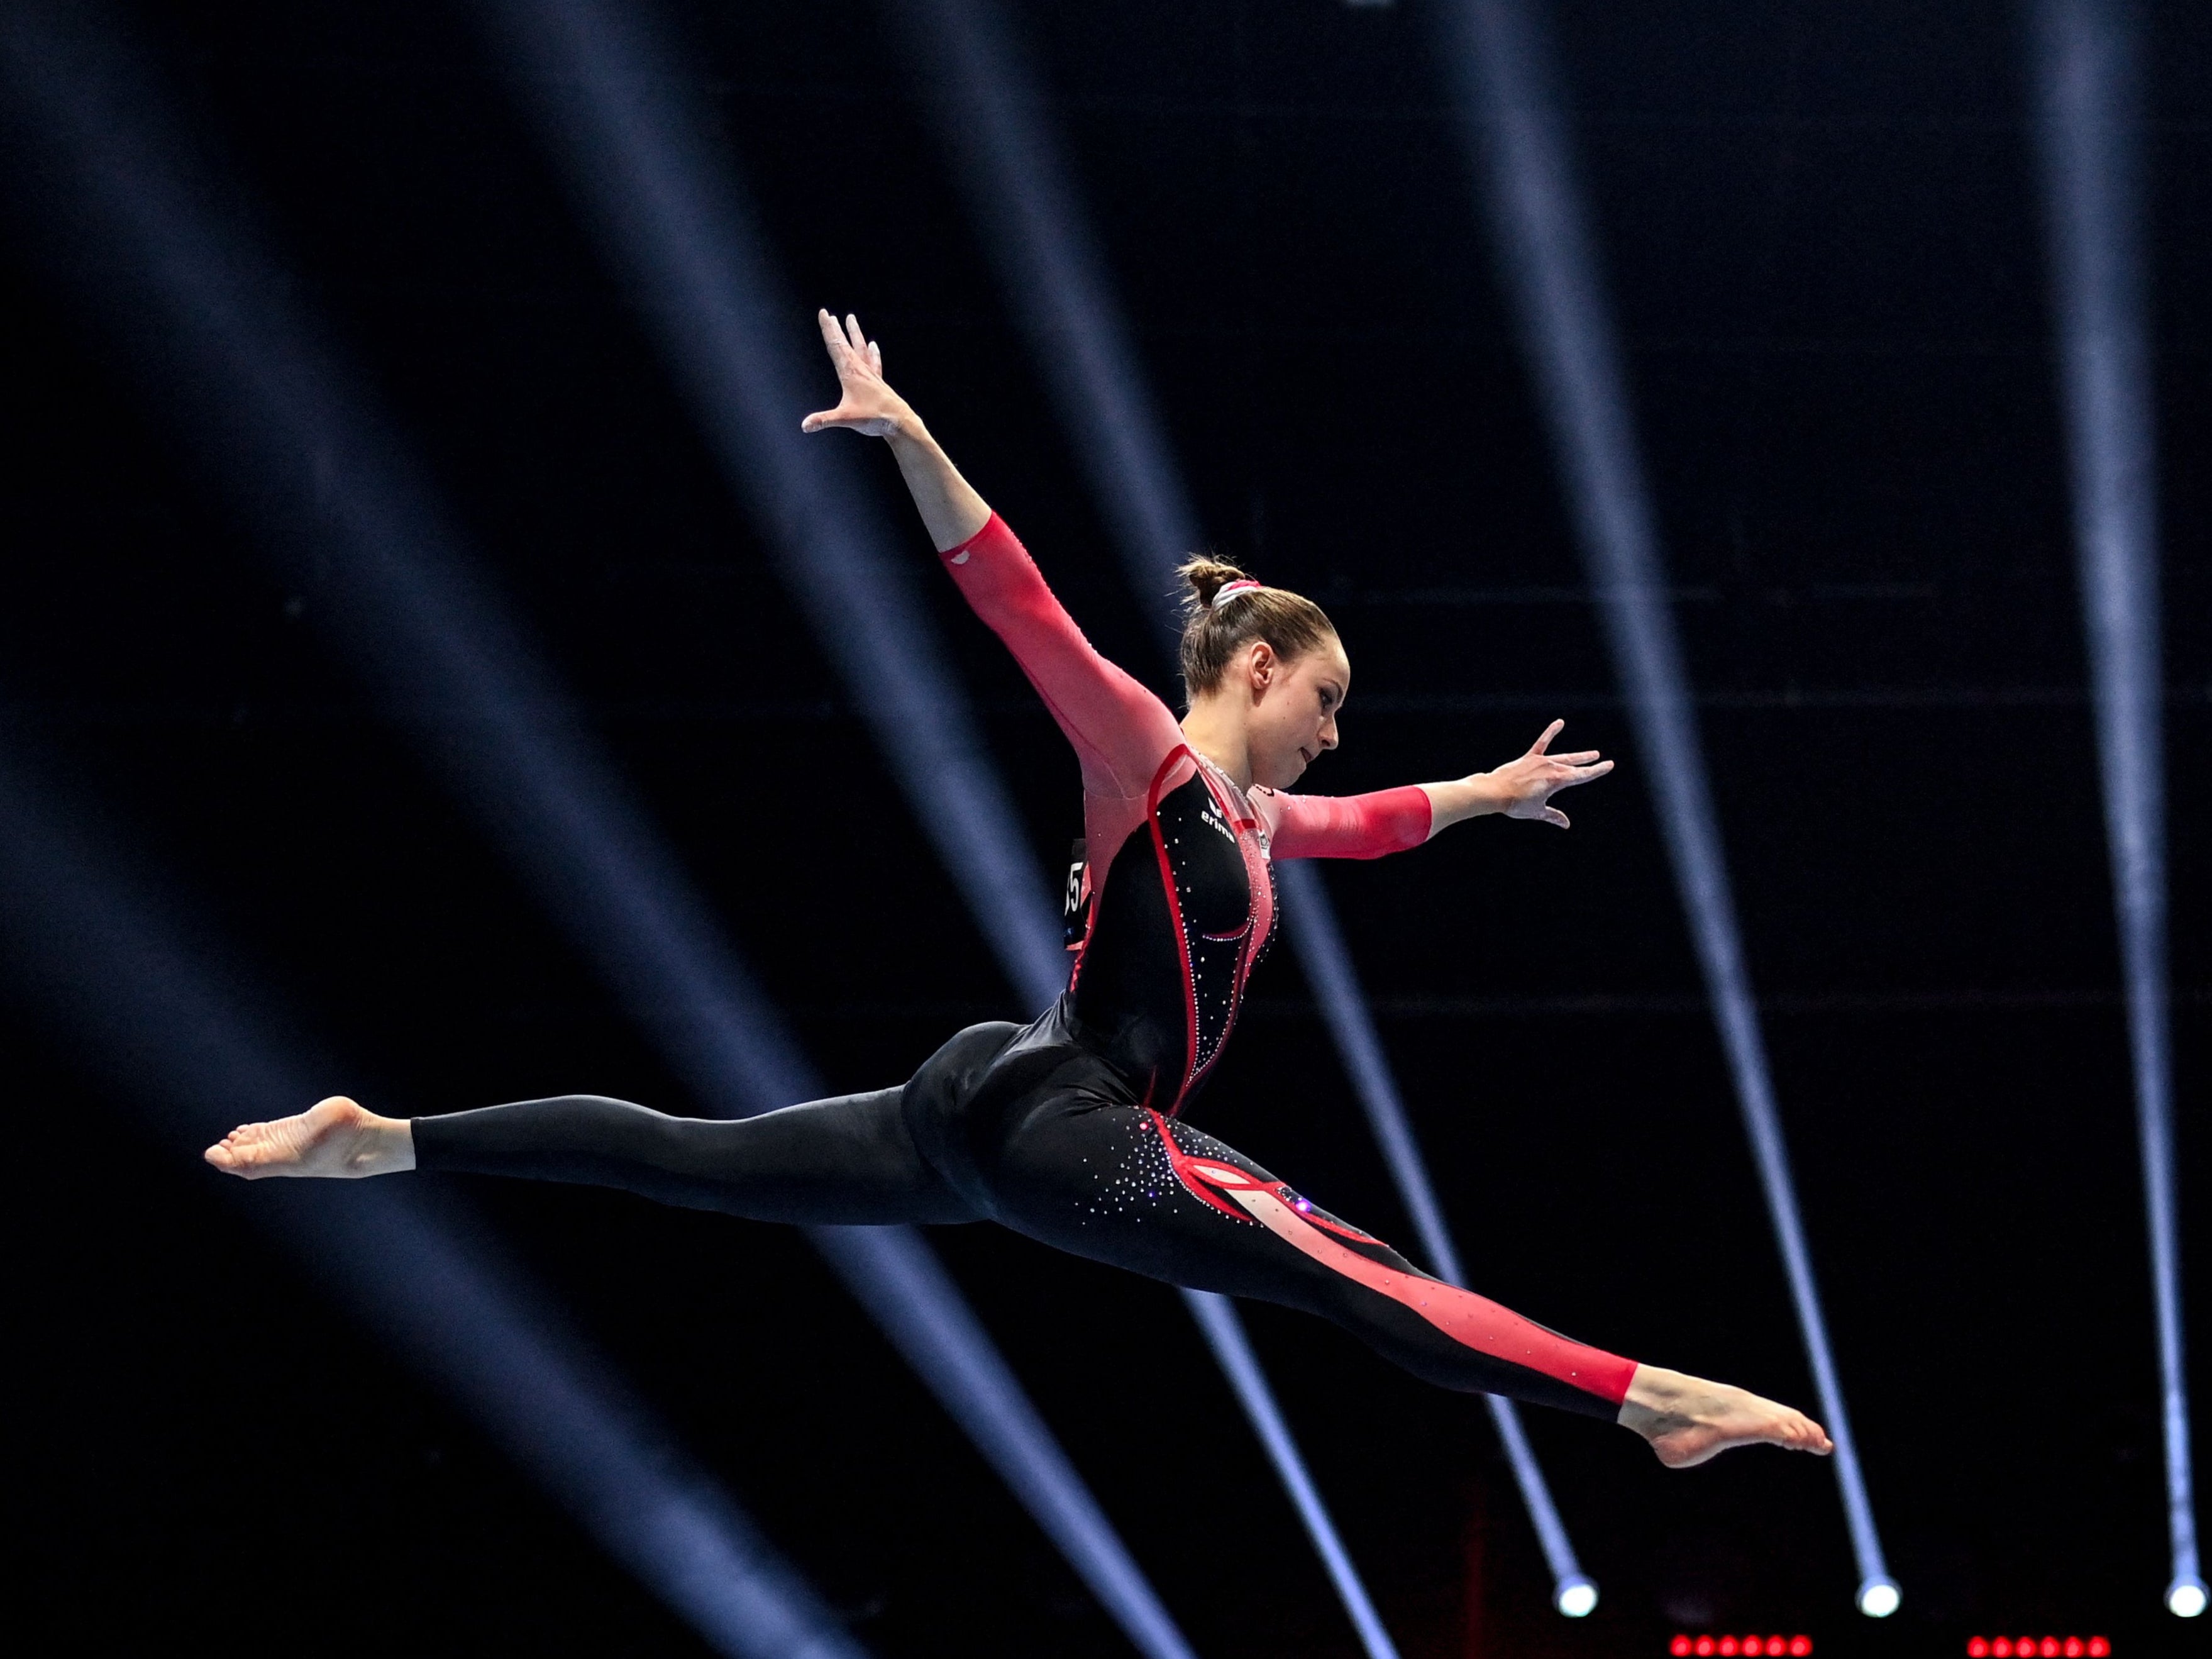 Sarah Voss at the European Artistic Gymnastics Championships in April